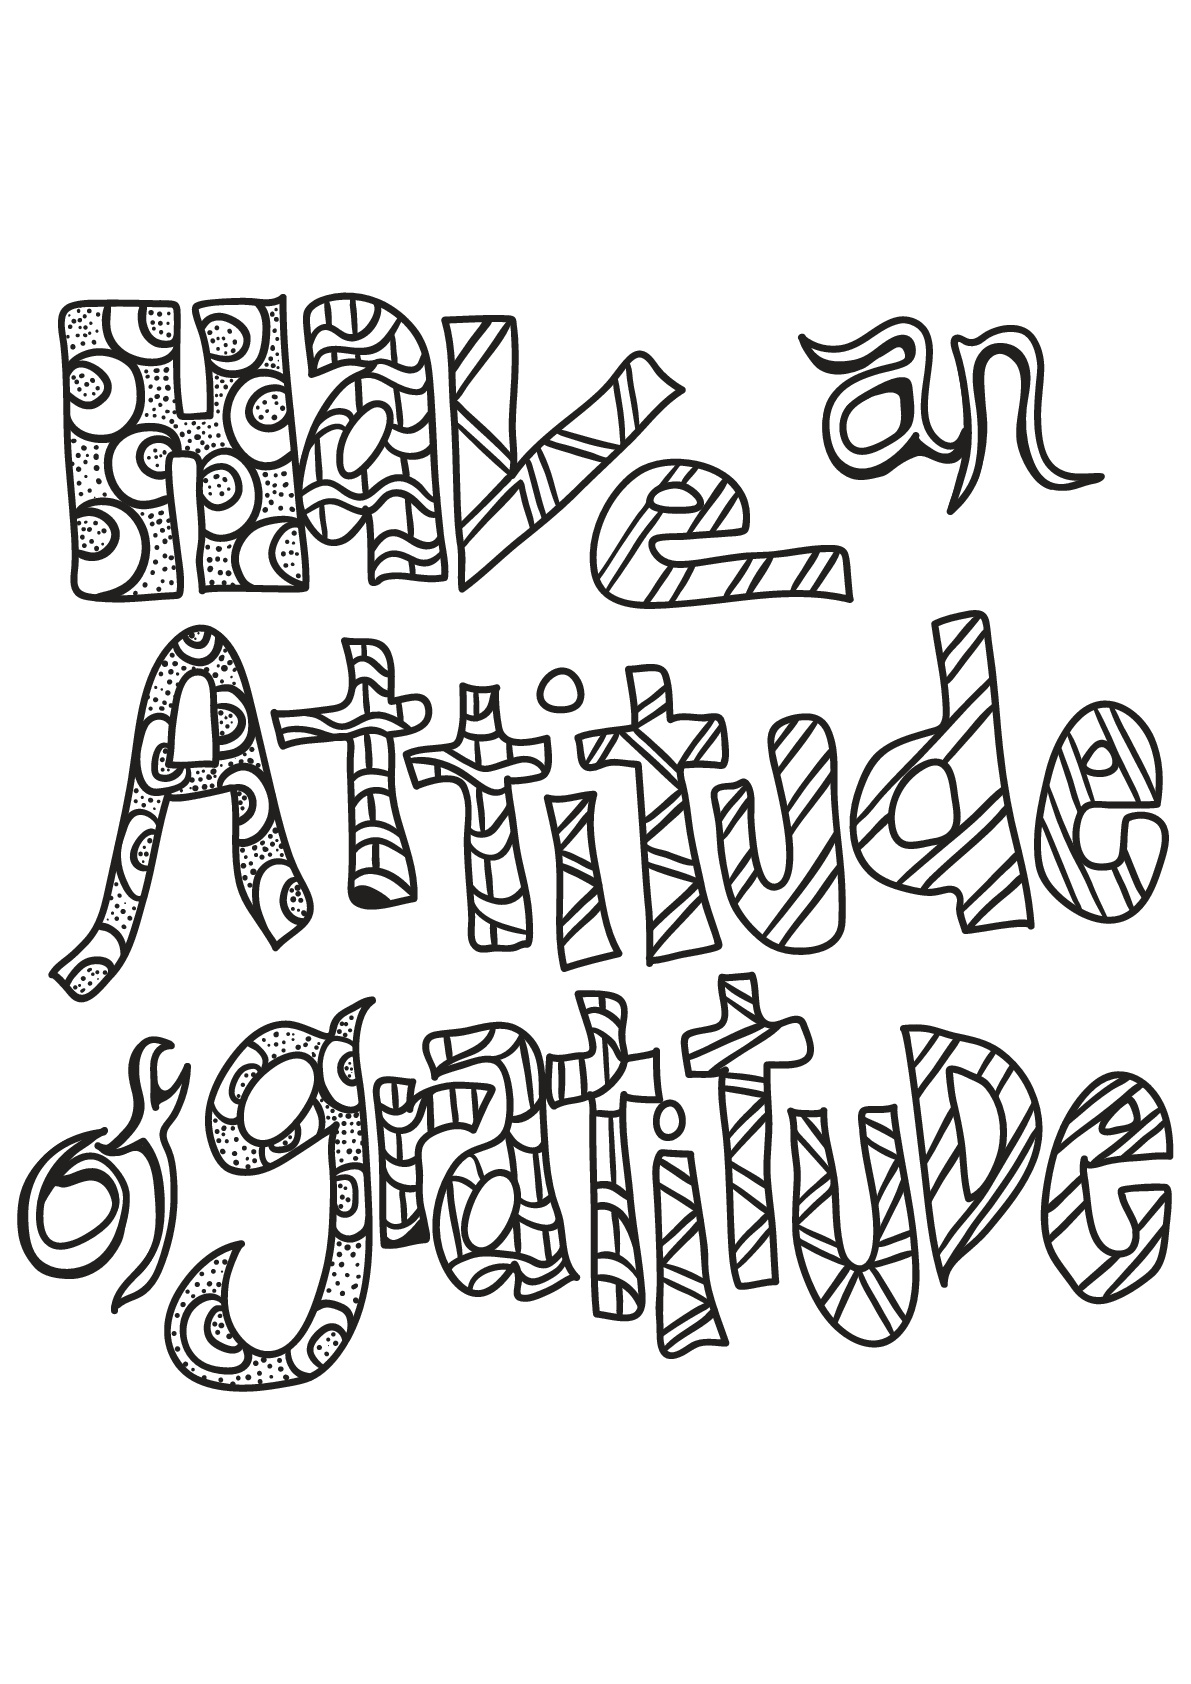 Download Free Book Quote 7 Positive Inspiring Quotes Adult Coloring Pages